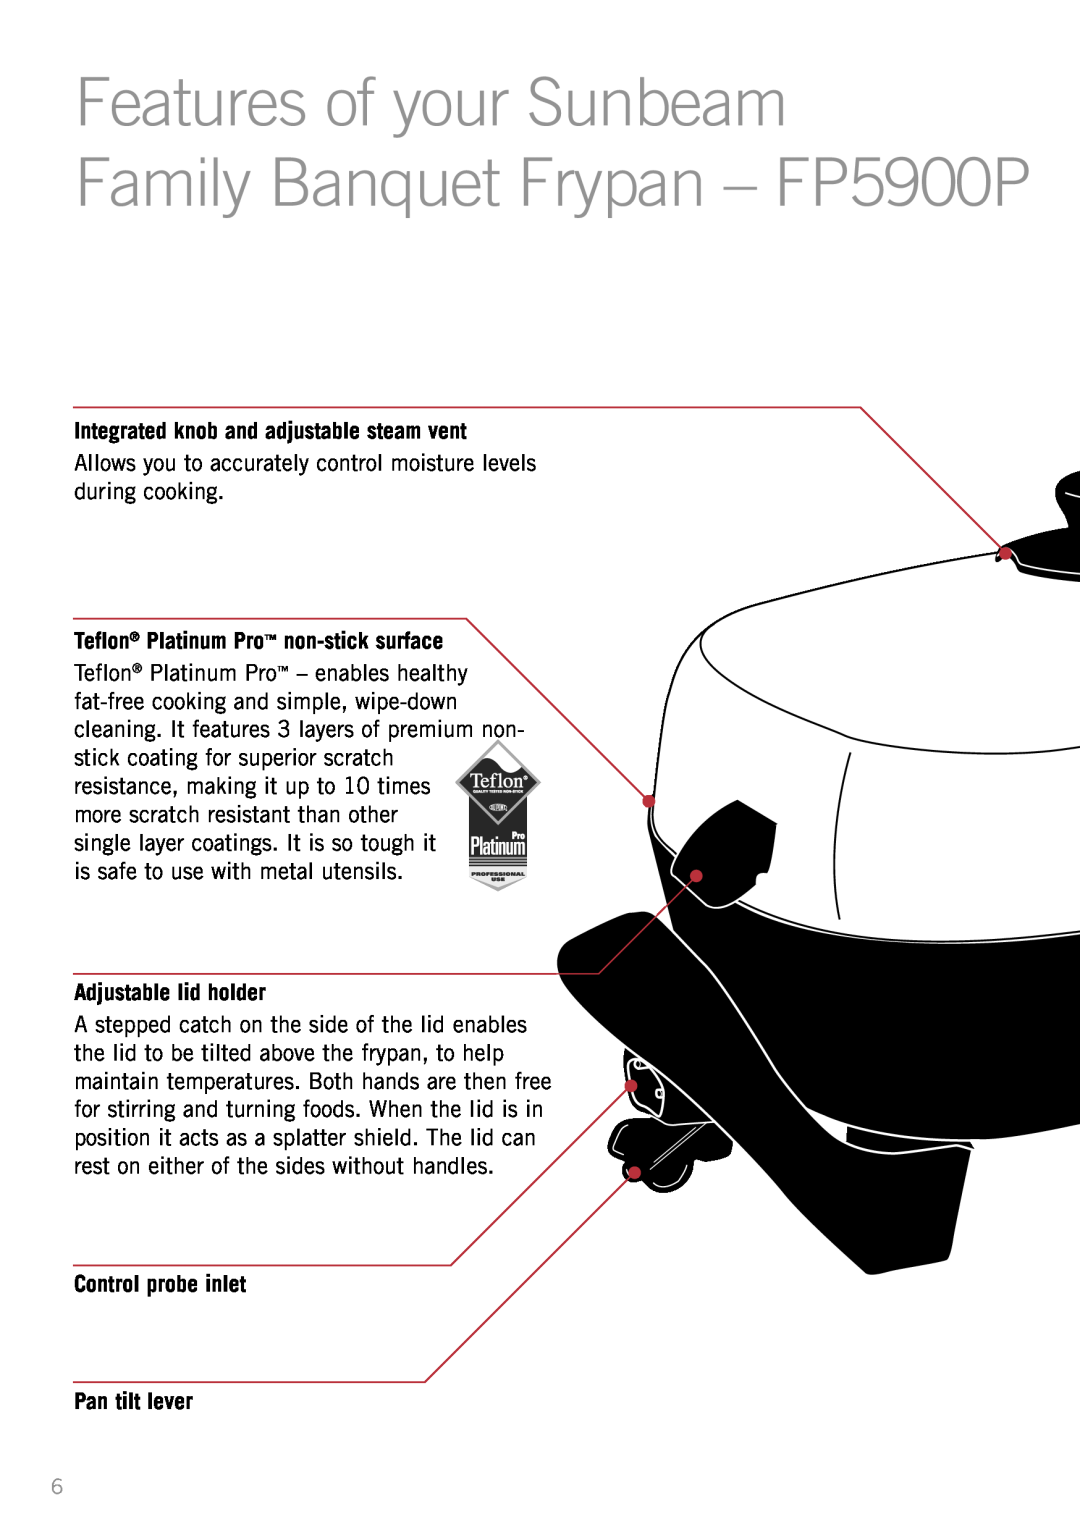 Sunbeam FP5910 manual Features of your Sunbeam, Family Banquet Frypan – FP5900P, Integrated knob and adjustable steam vent 